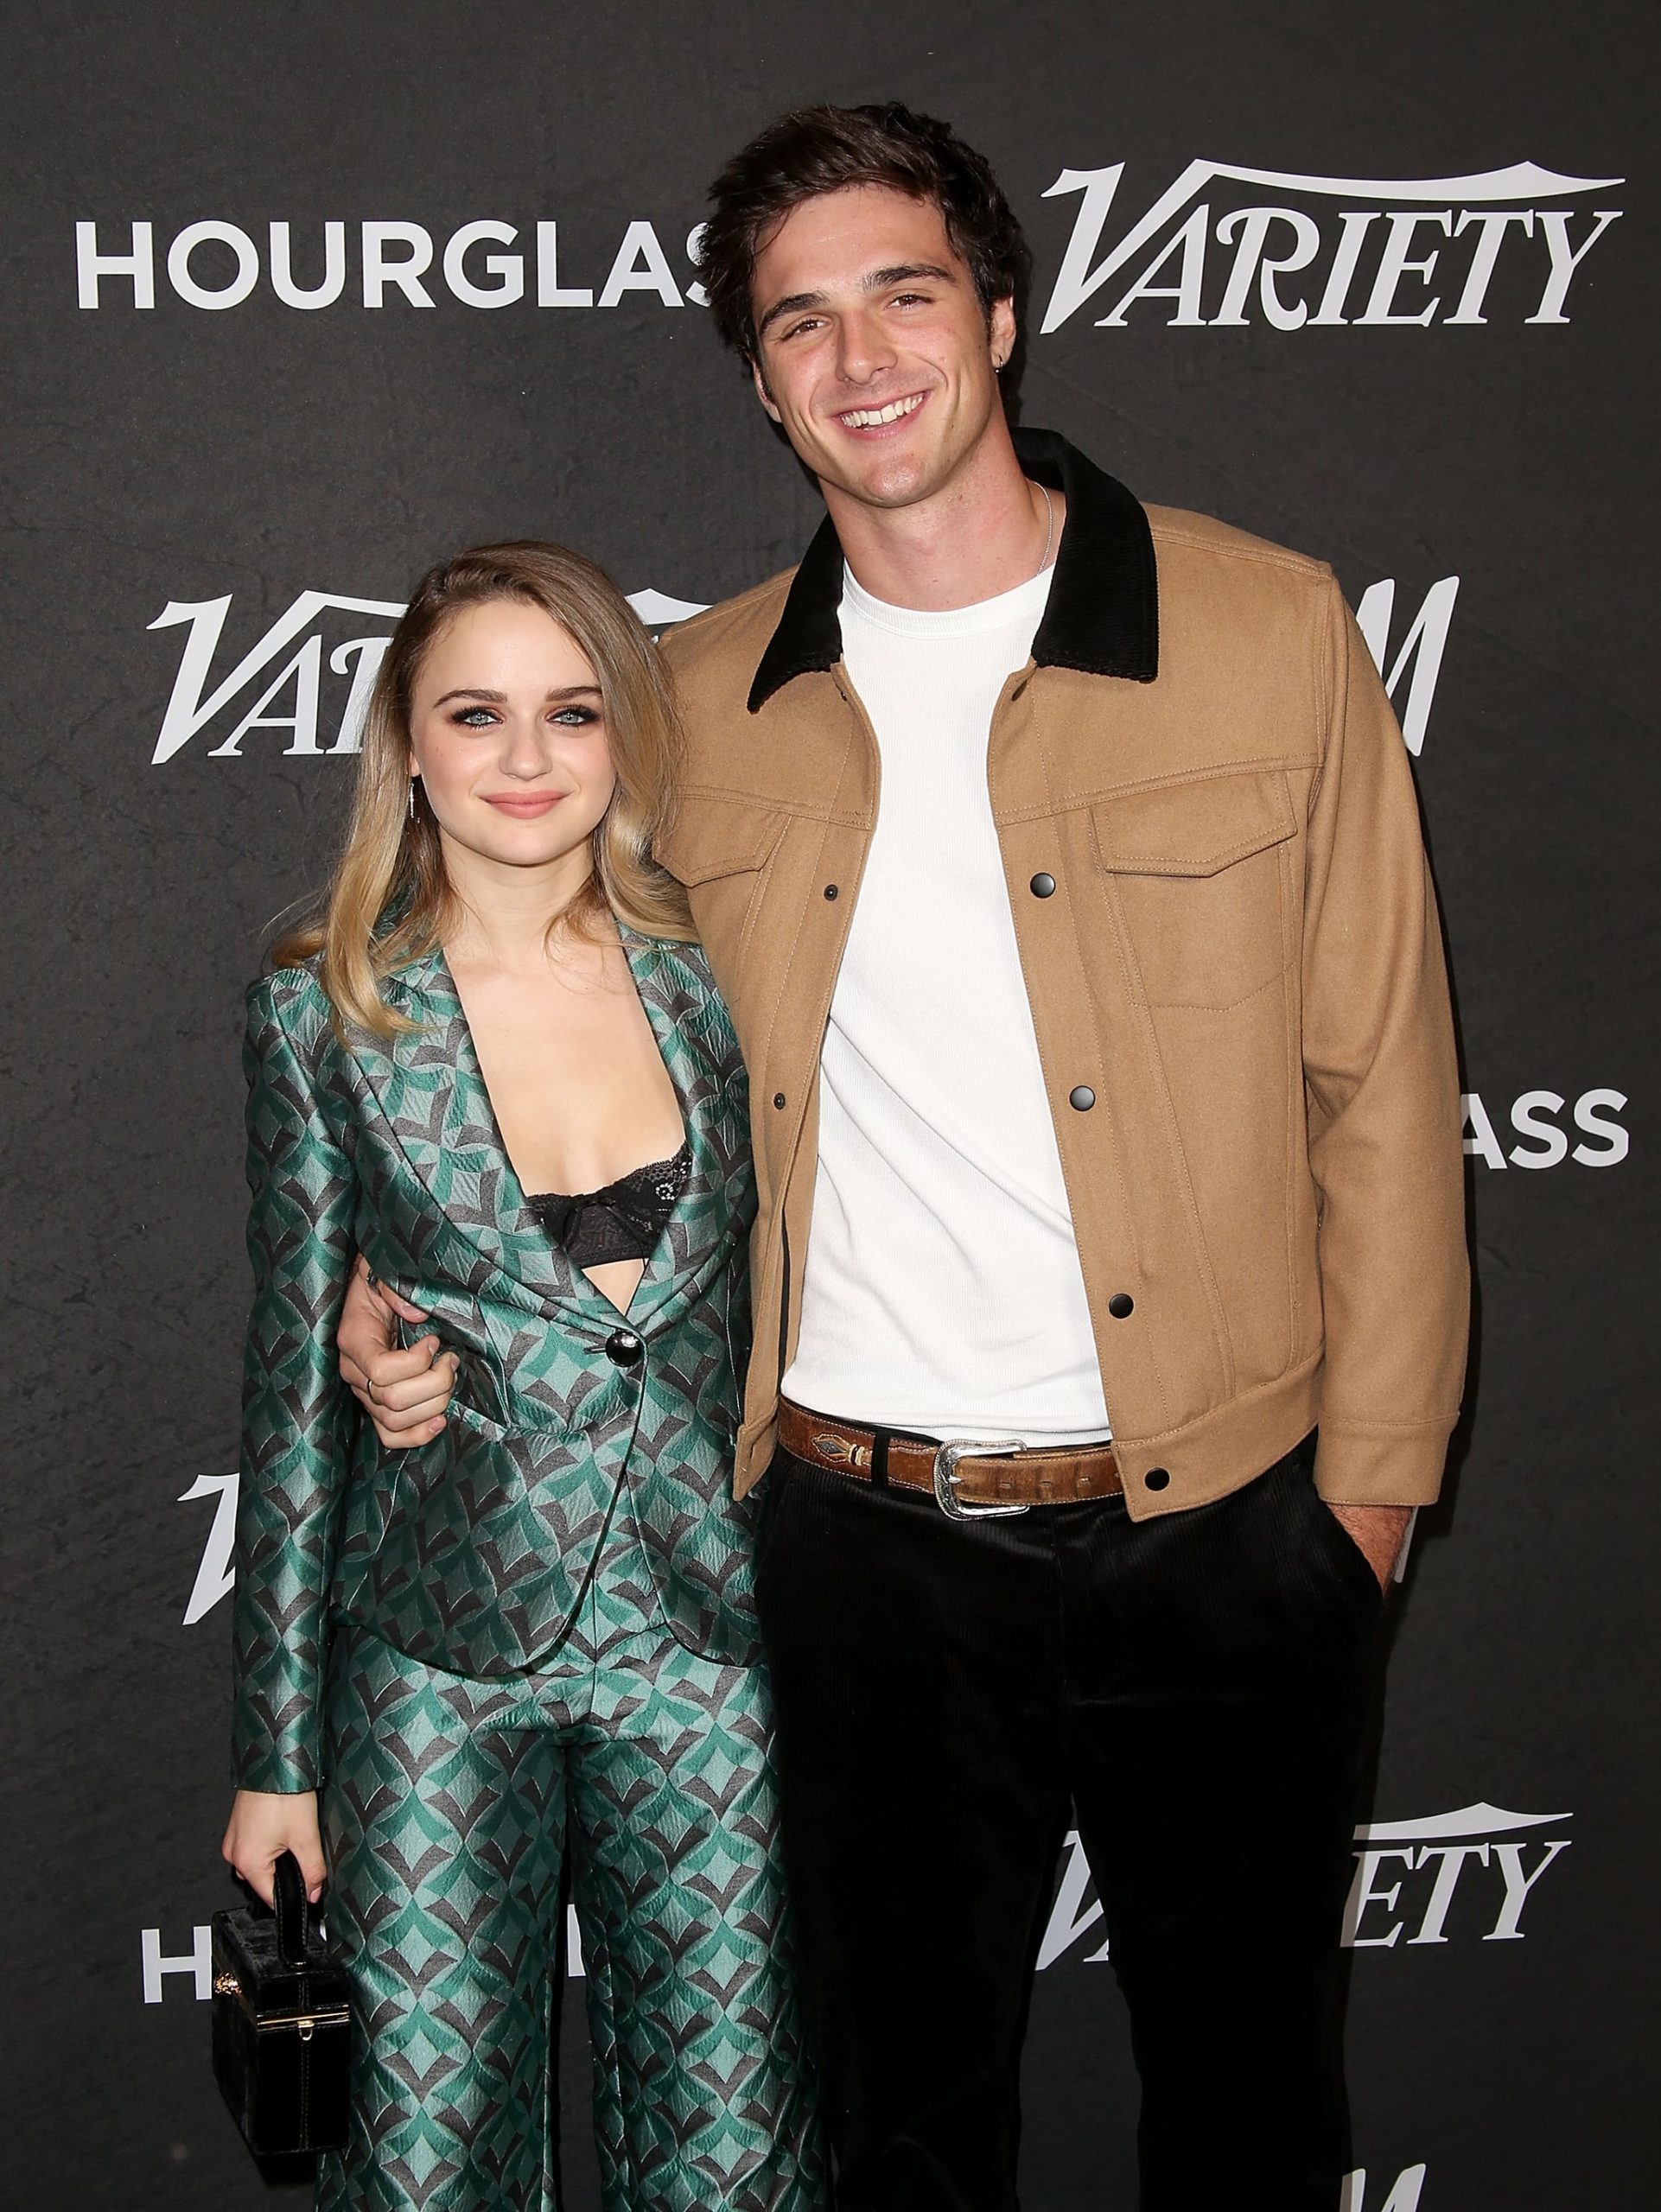 WEST HOLLYWOOD, CA - AUGUST 28:  Joey King and Jacob Elordi attend Variety's Power of Young Hollywood event at the Sunset Tower Hotel on August 28, 2018 in West Hollywood, California.  (Photo by Jesse Grant/WireImage)